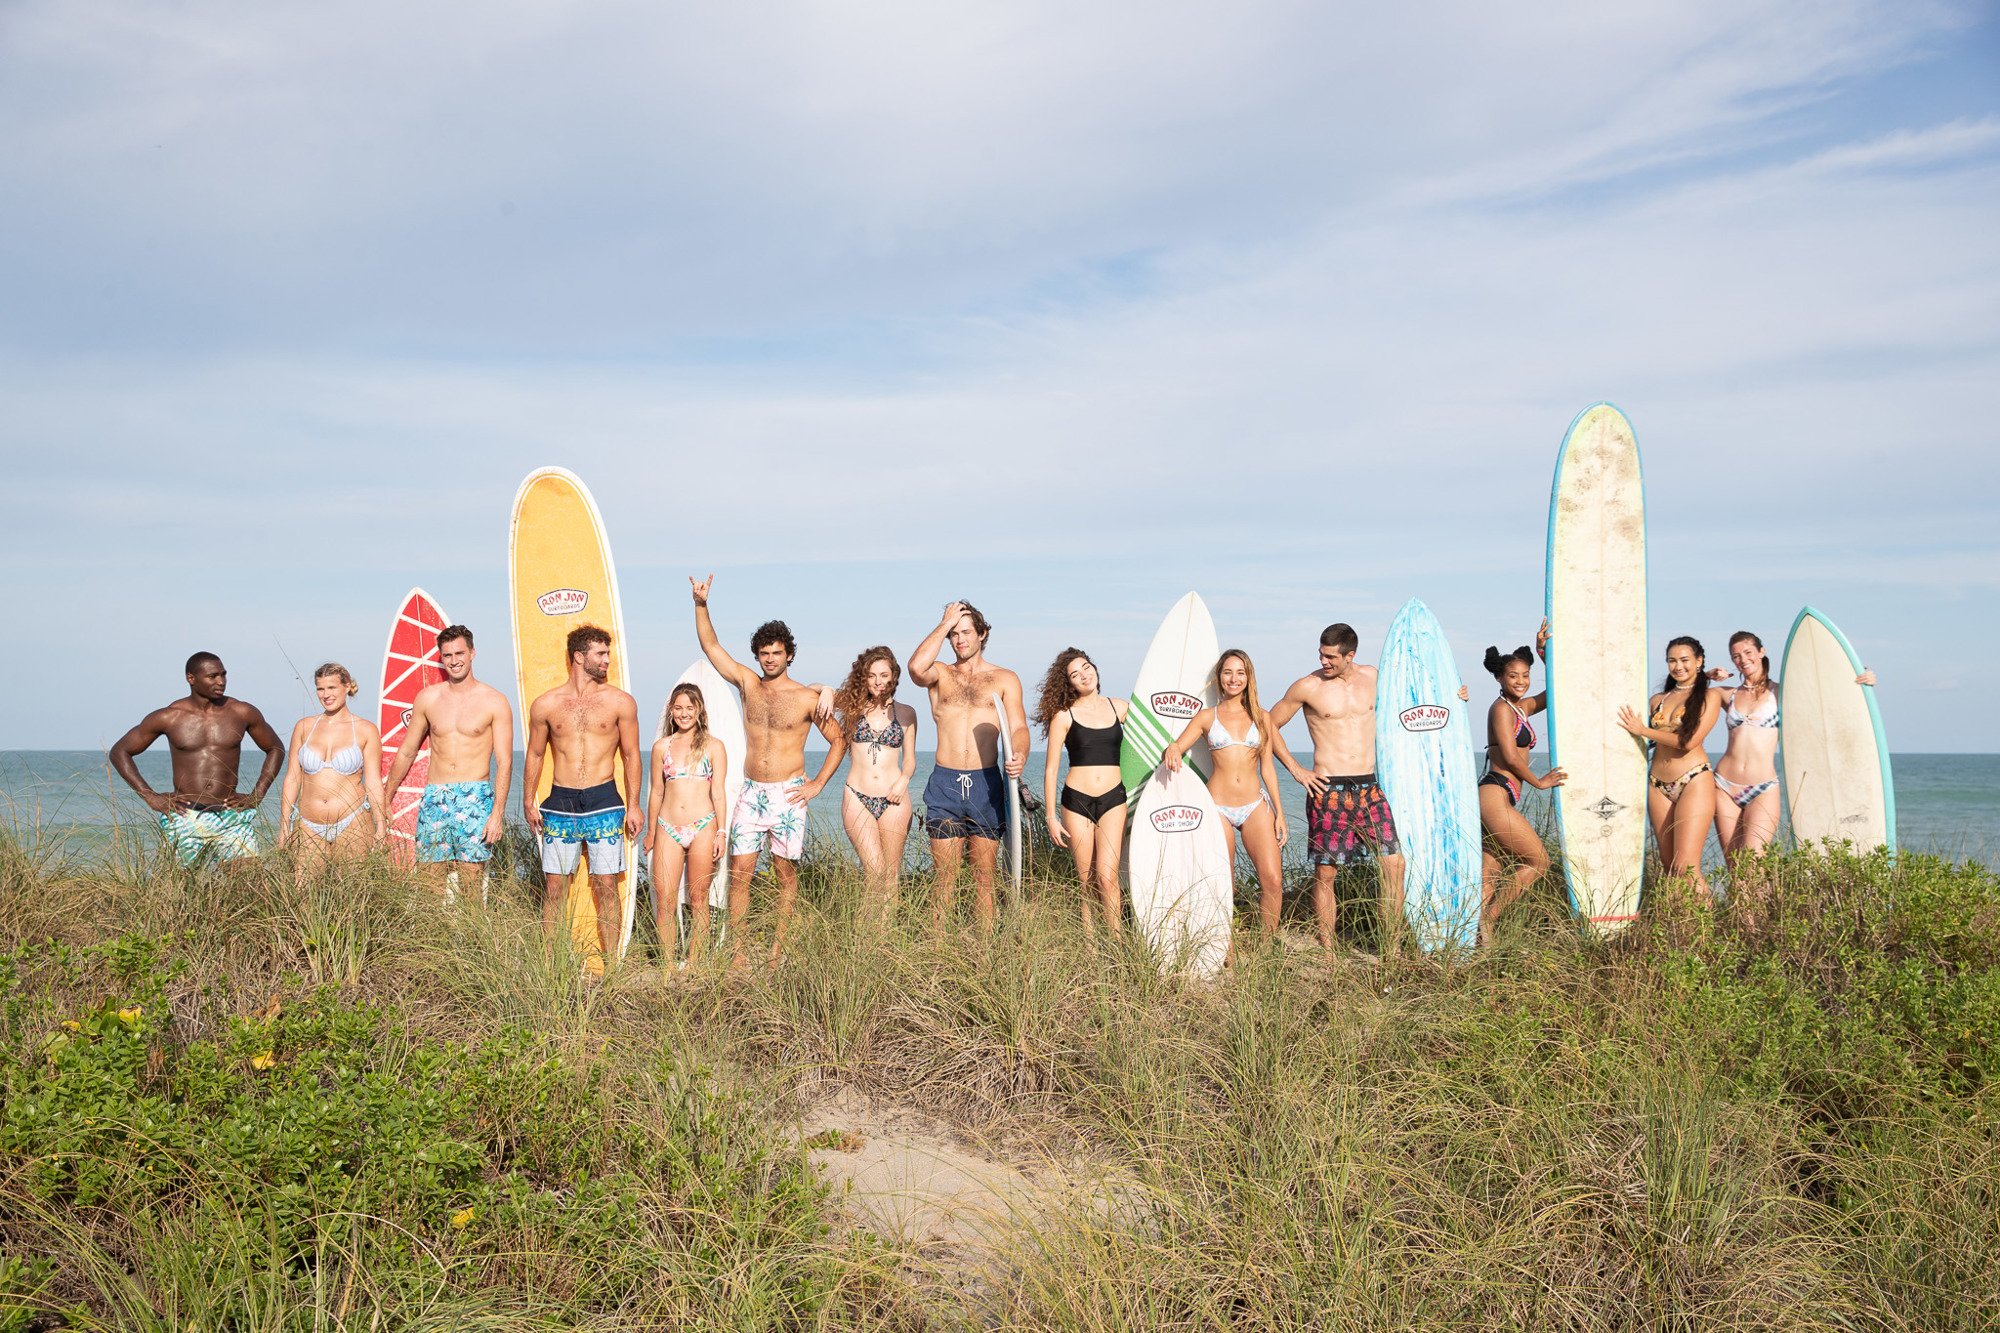 group photo in swimwear with surfboards